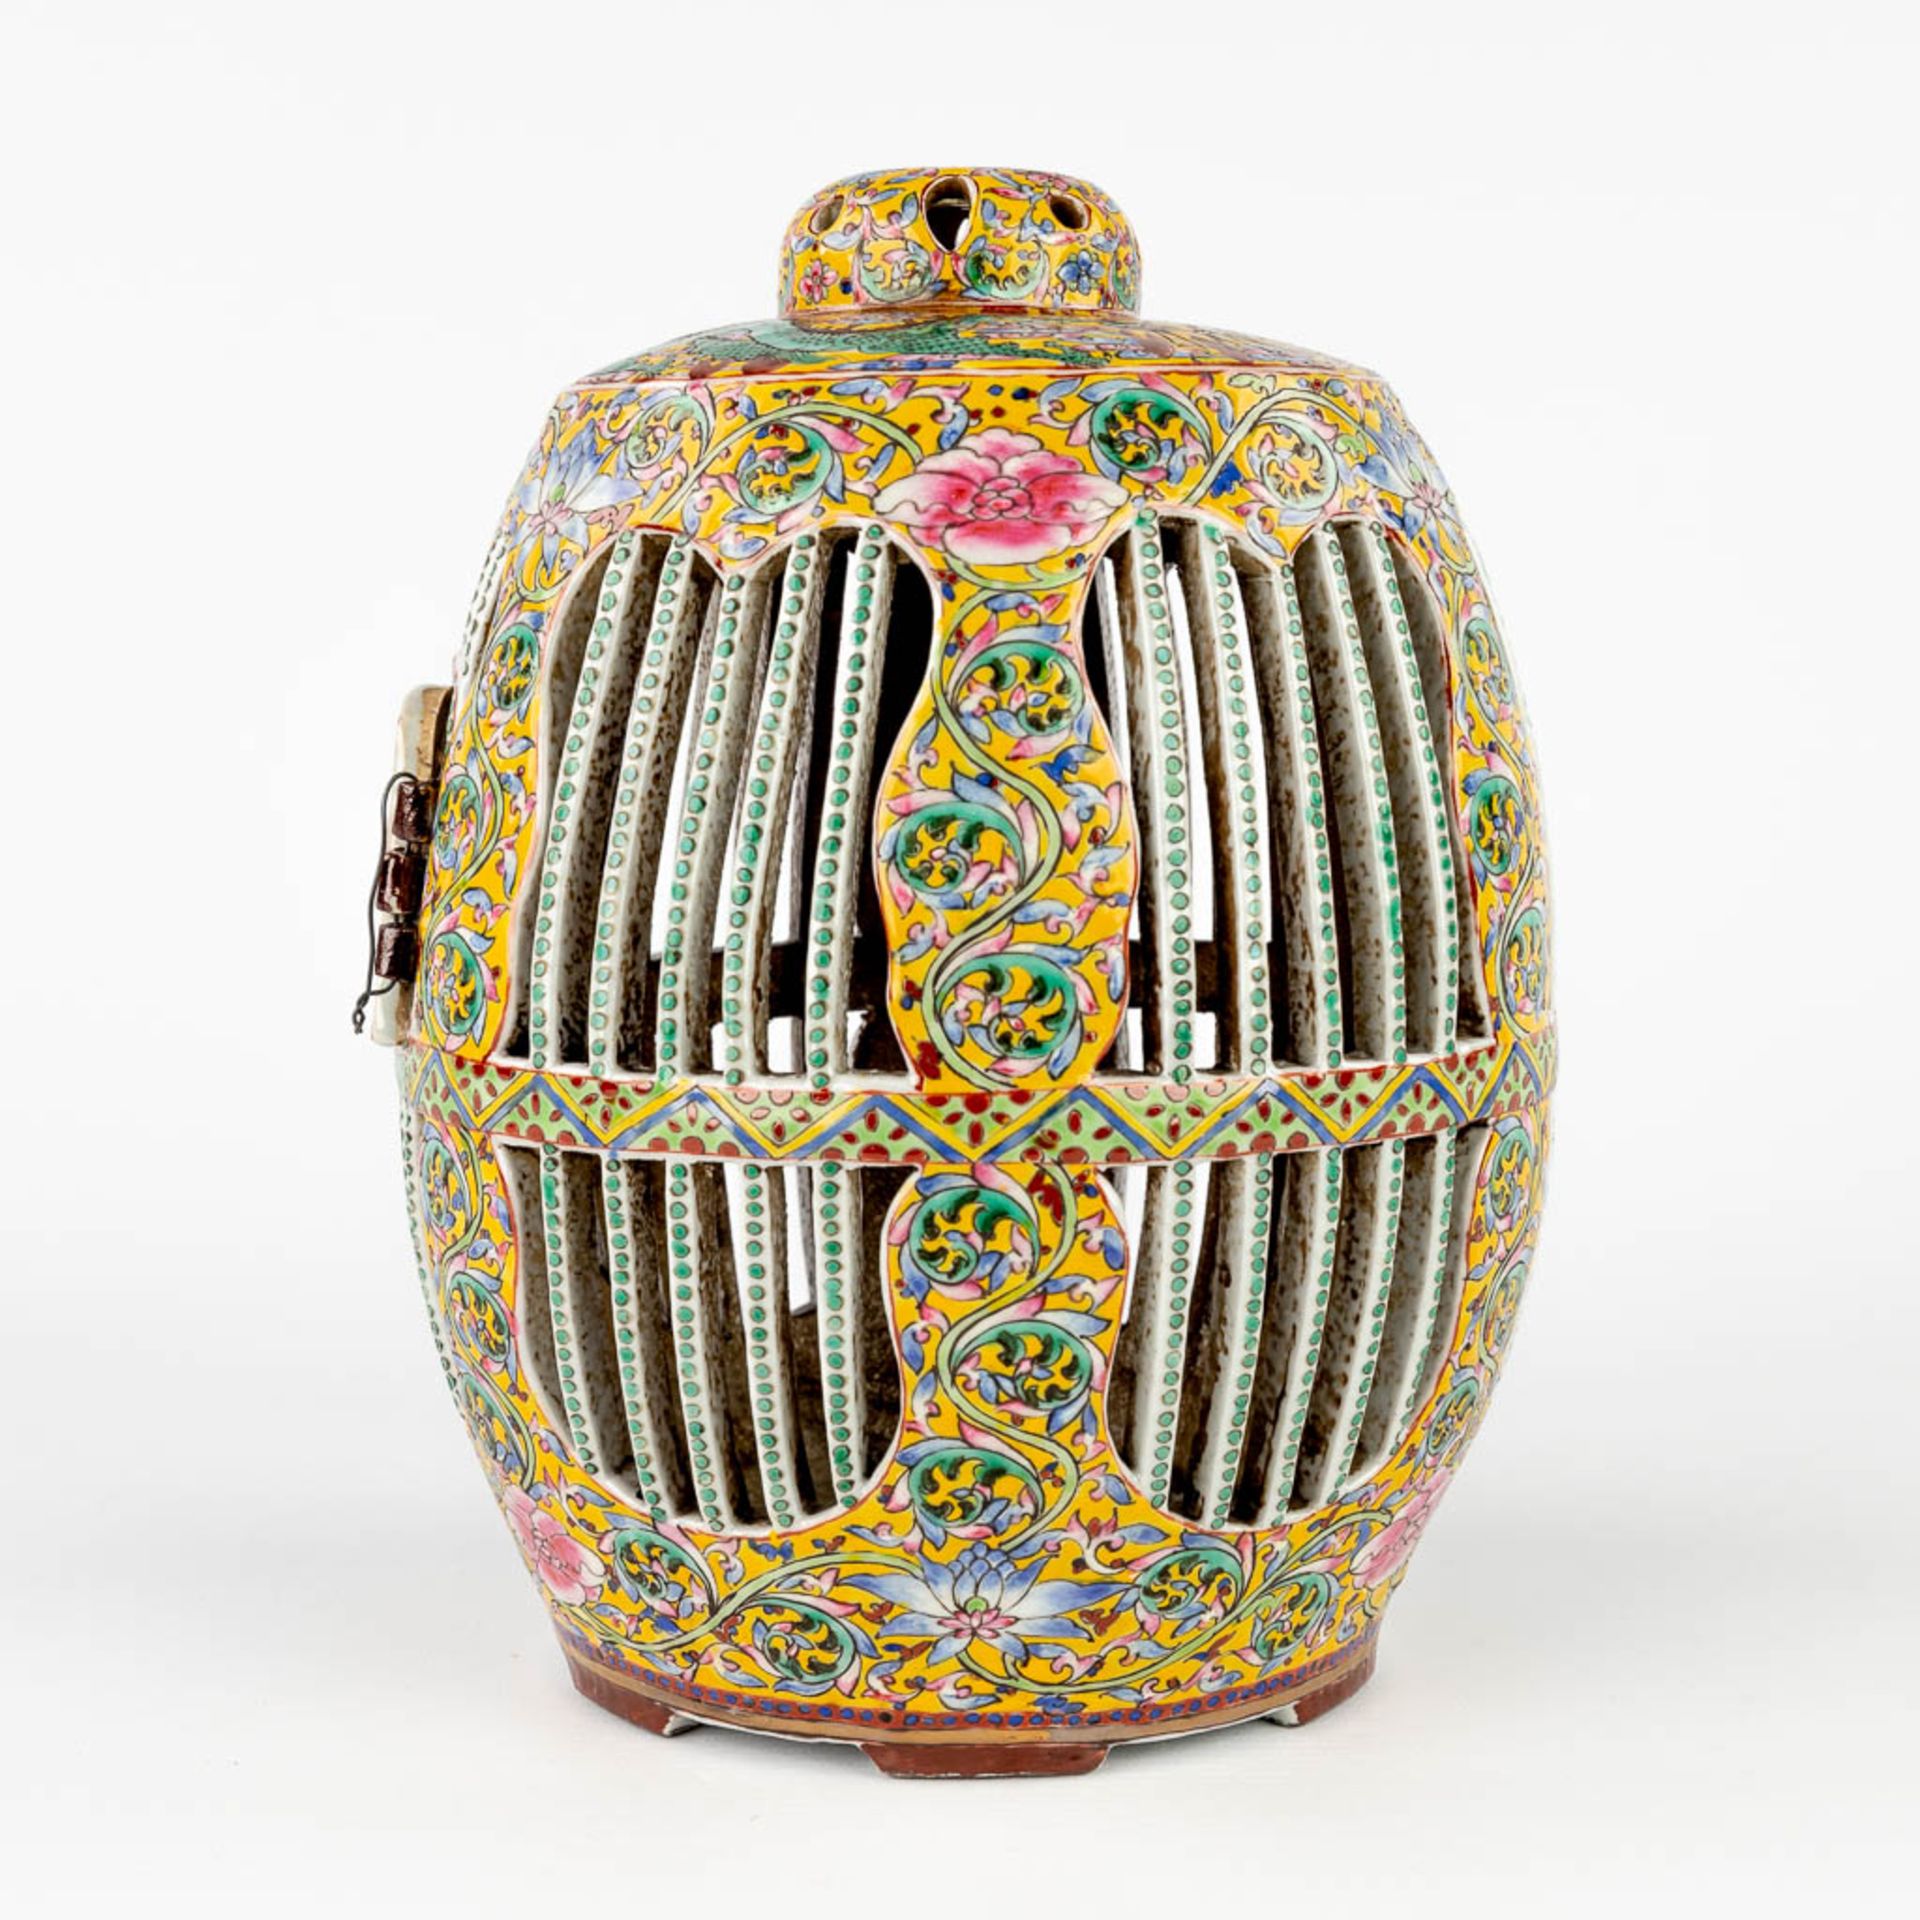 A Chinese porcelain 'Bird Cage', Famille Rose, Qianlong Mark. 20th C. (H:25 x D:19 cm) - Image 7 of 12